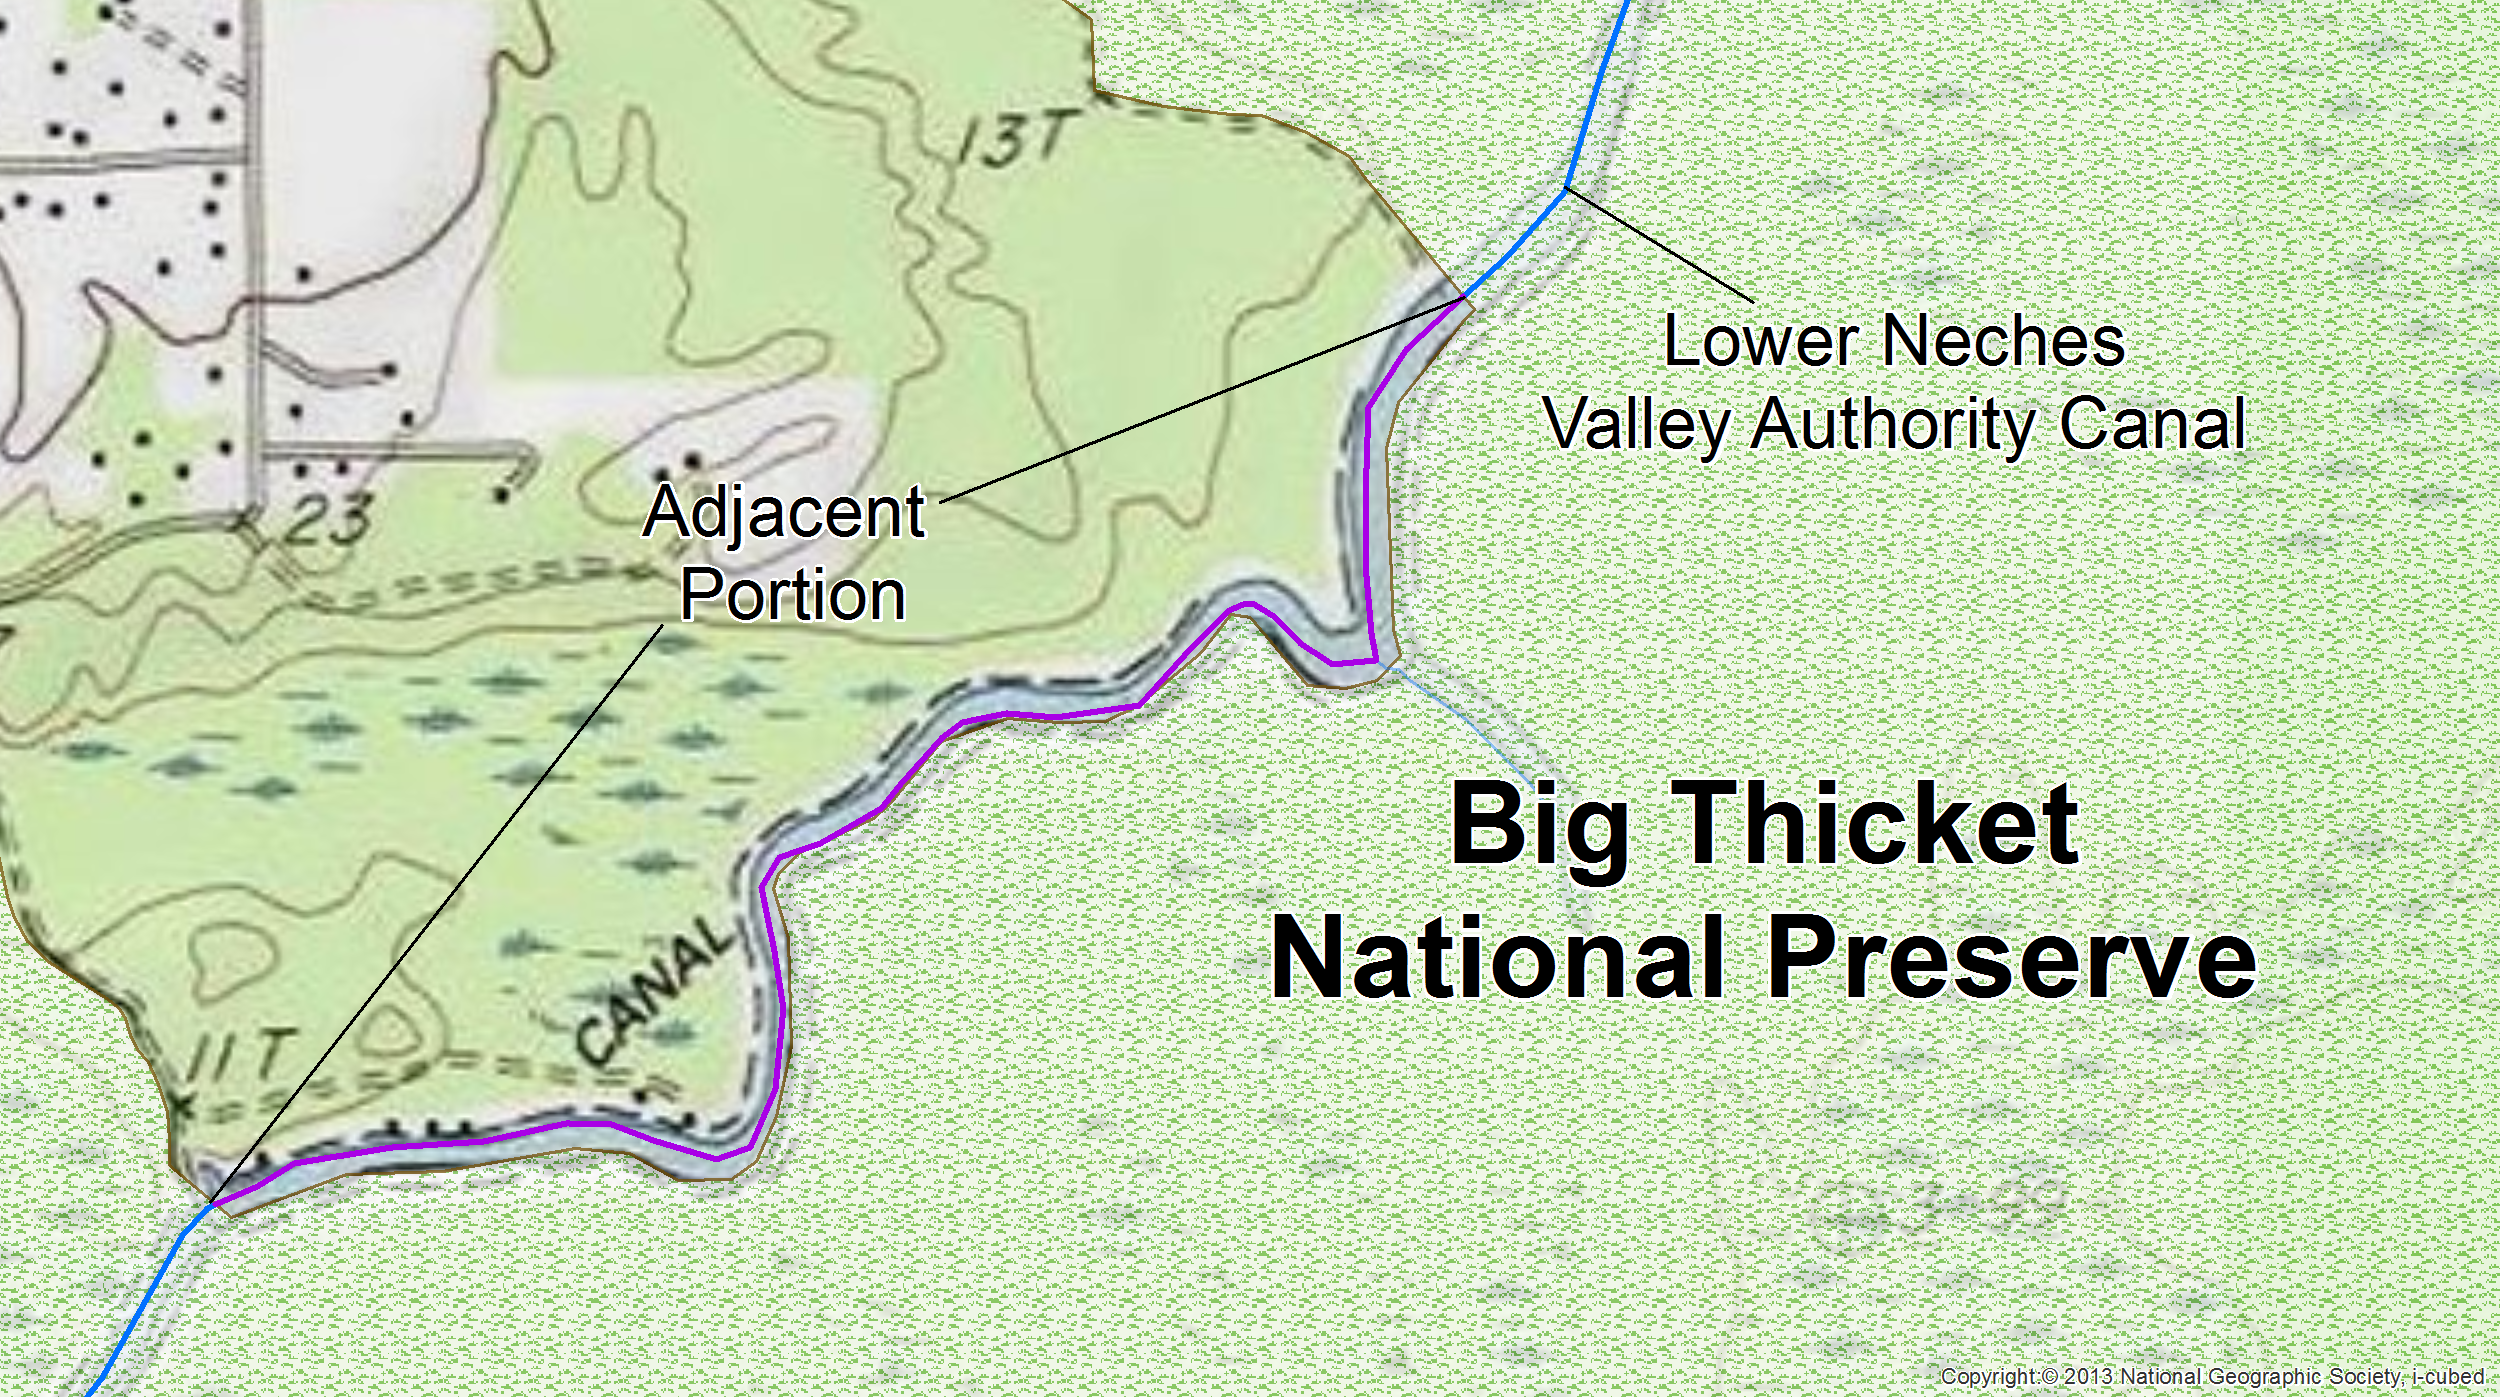 In Big Thicket National Preserve, the straddling section of the Lower Neches Valley Authority Canal was parsed from the rest of canal and identified as adjacent.